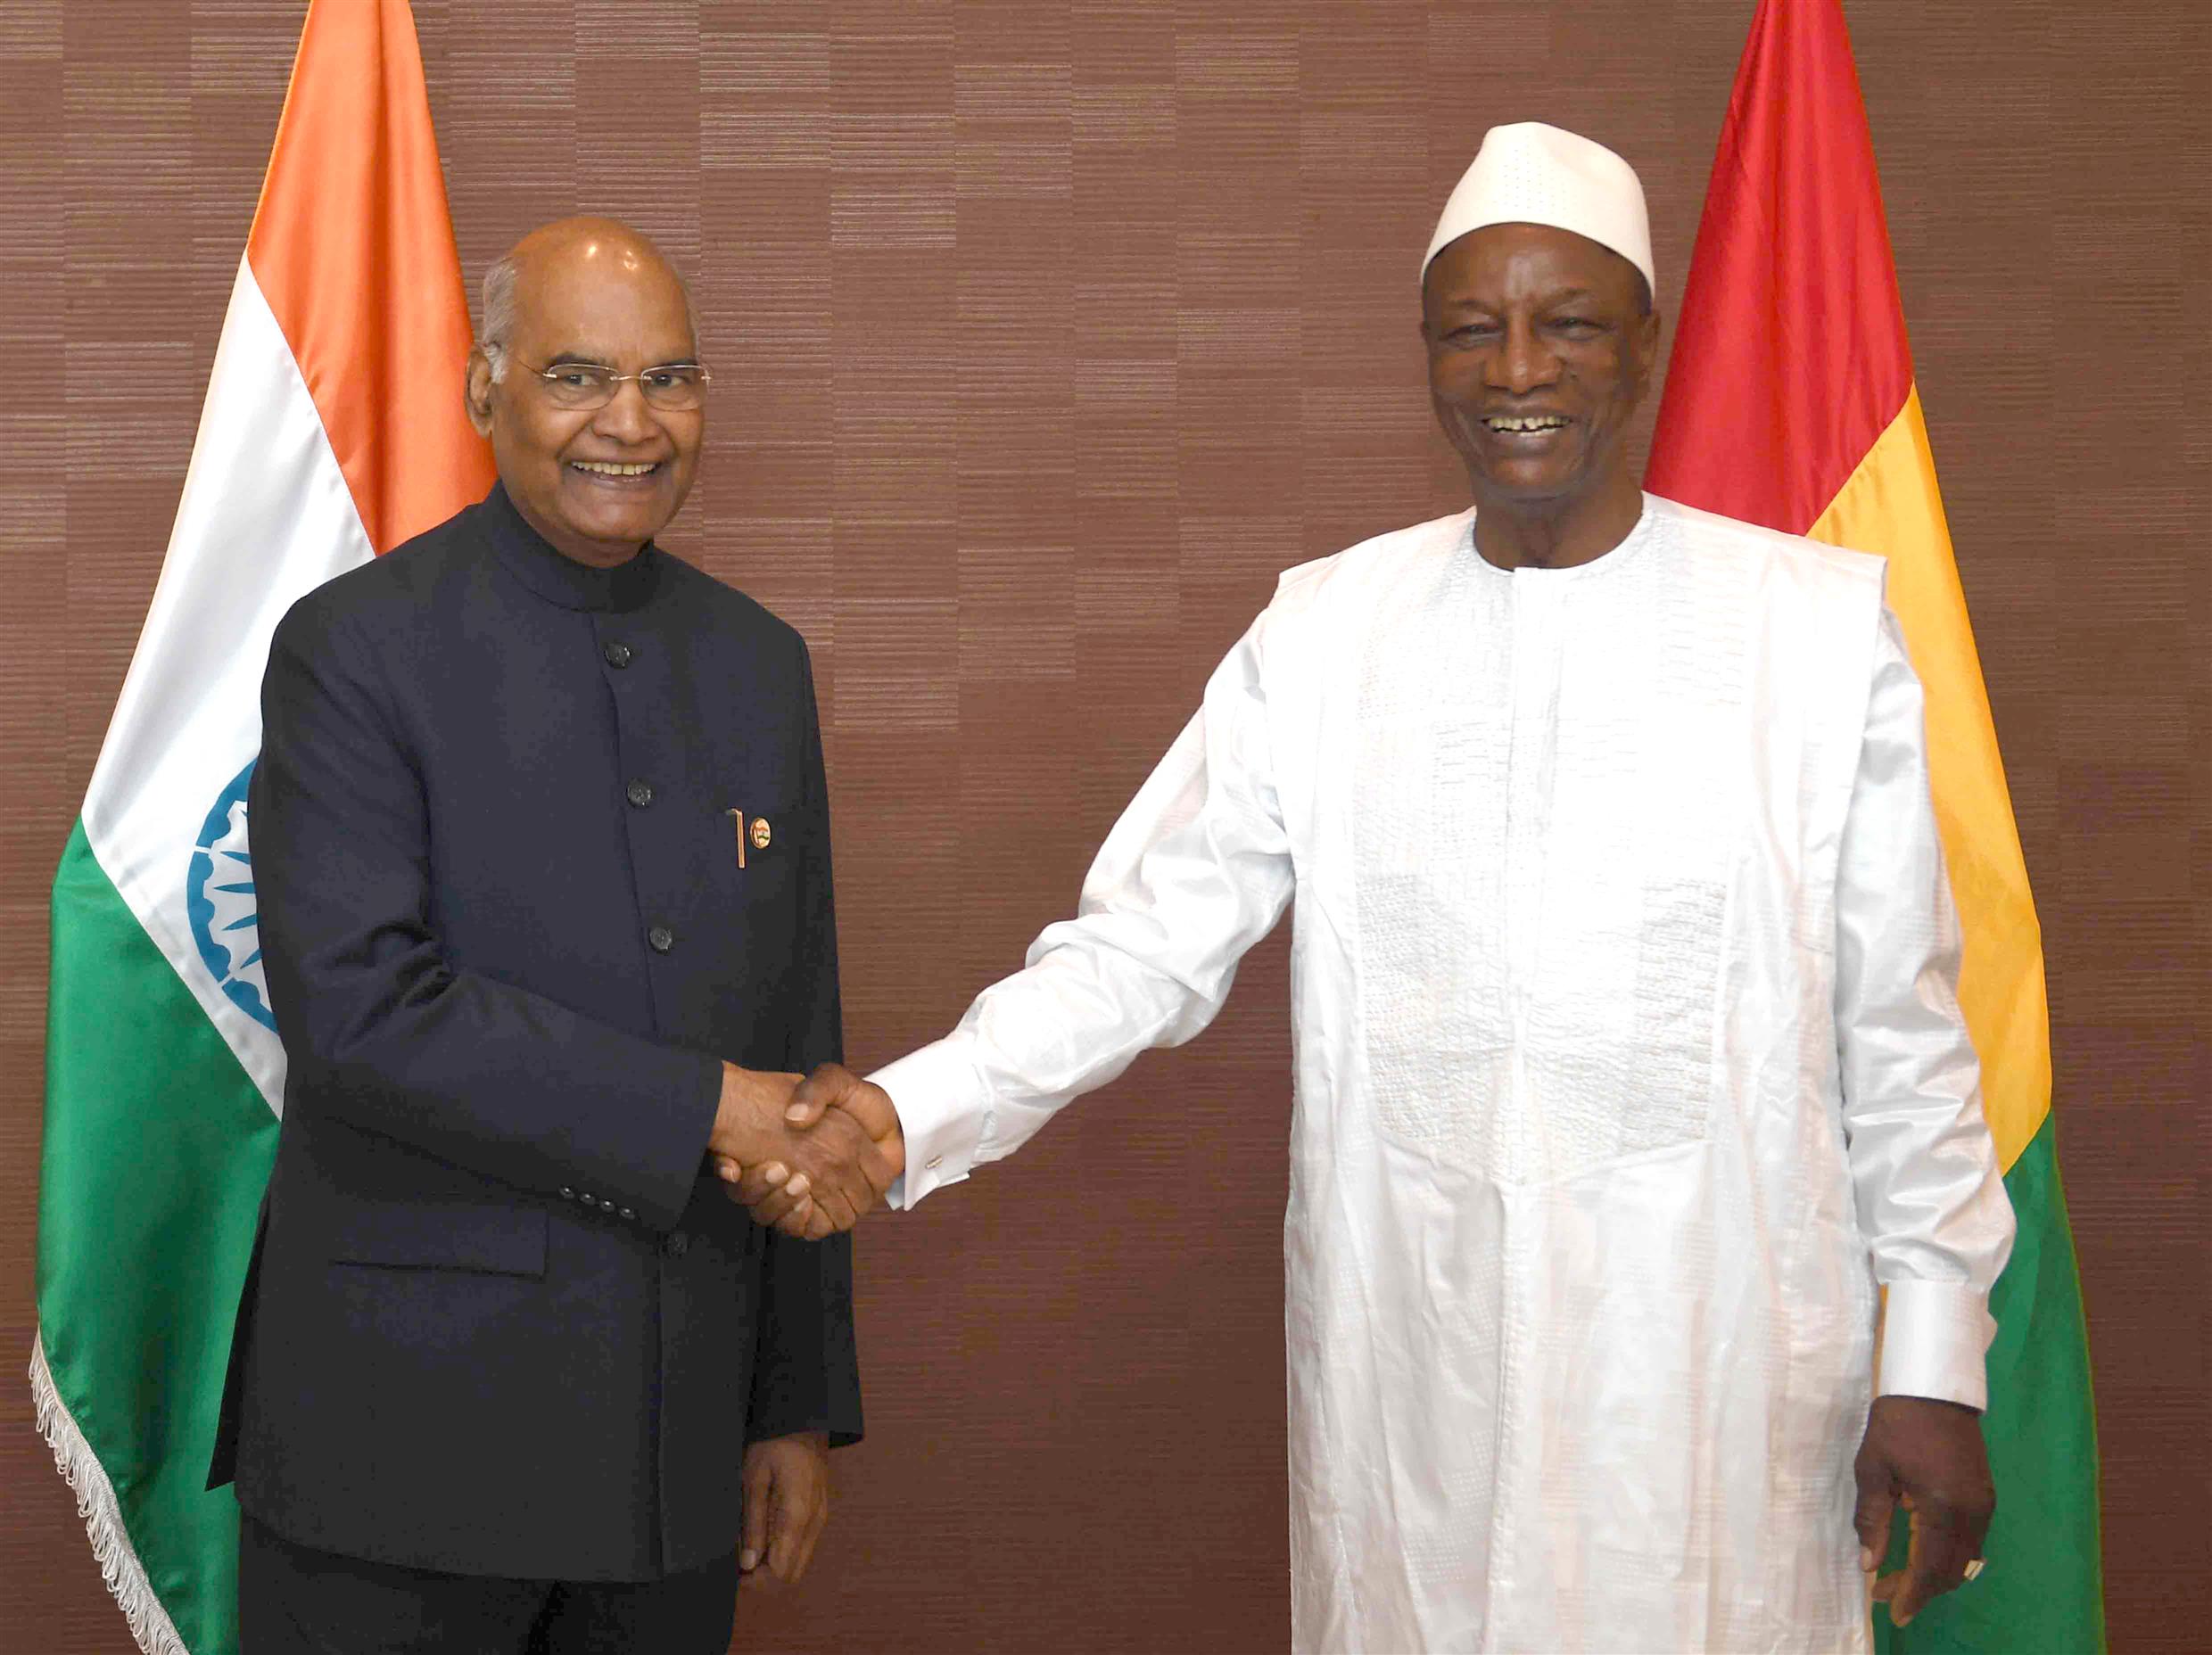 The President, Shri Ram Nath Kovind meeting the President of the Republic of Guinea, Mr. Alpha Conde, in Conakry, Republic of Guinea on August 02, 2019.